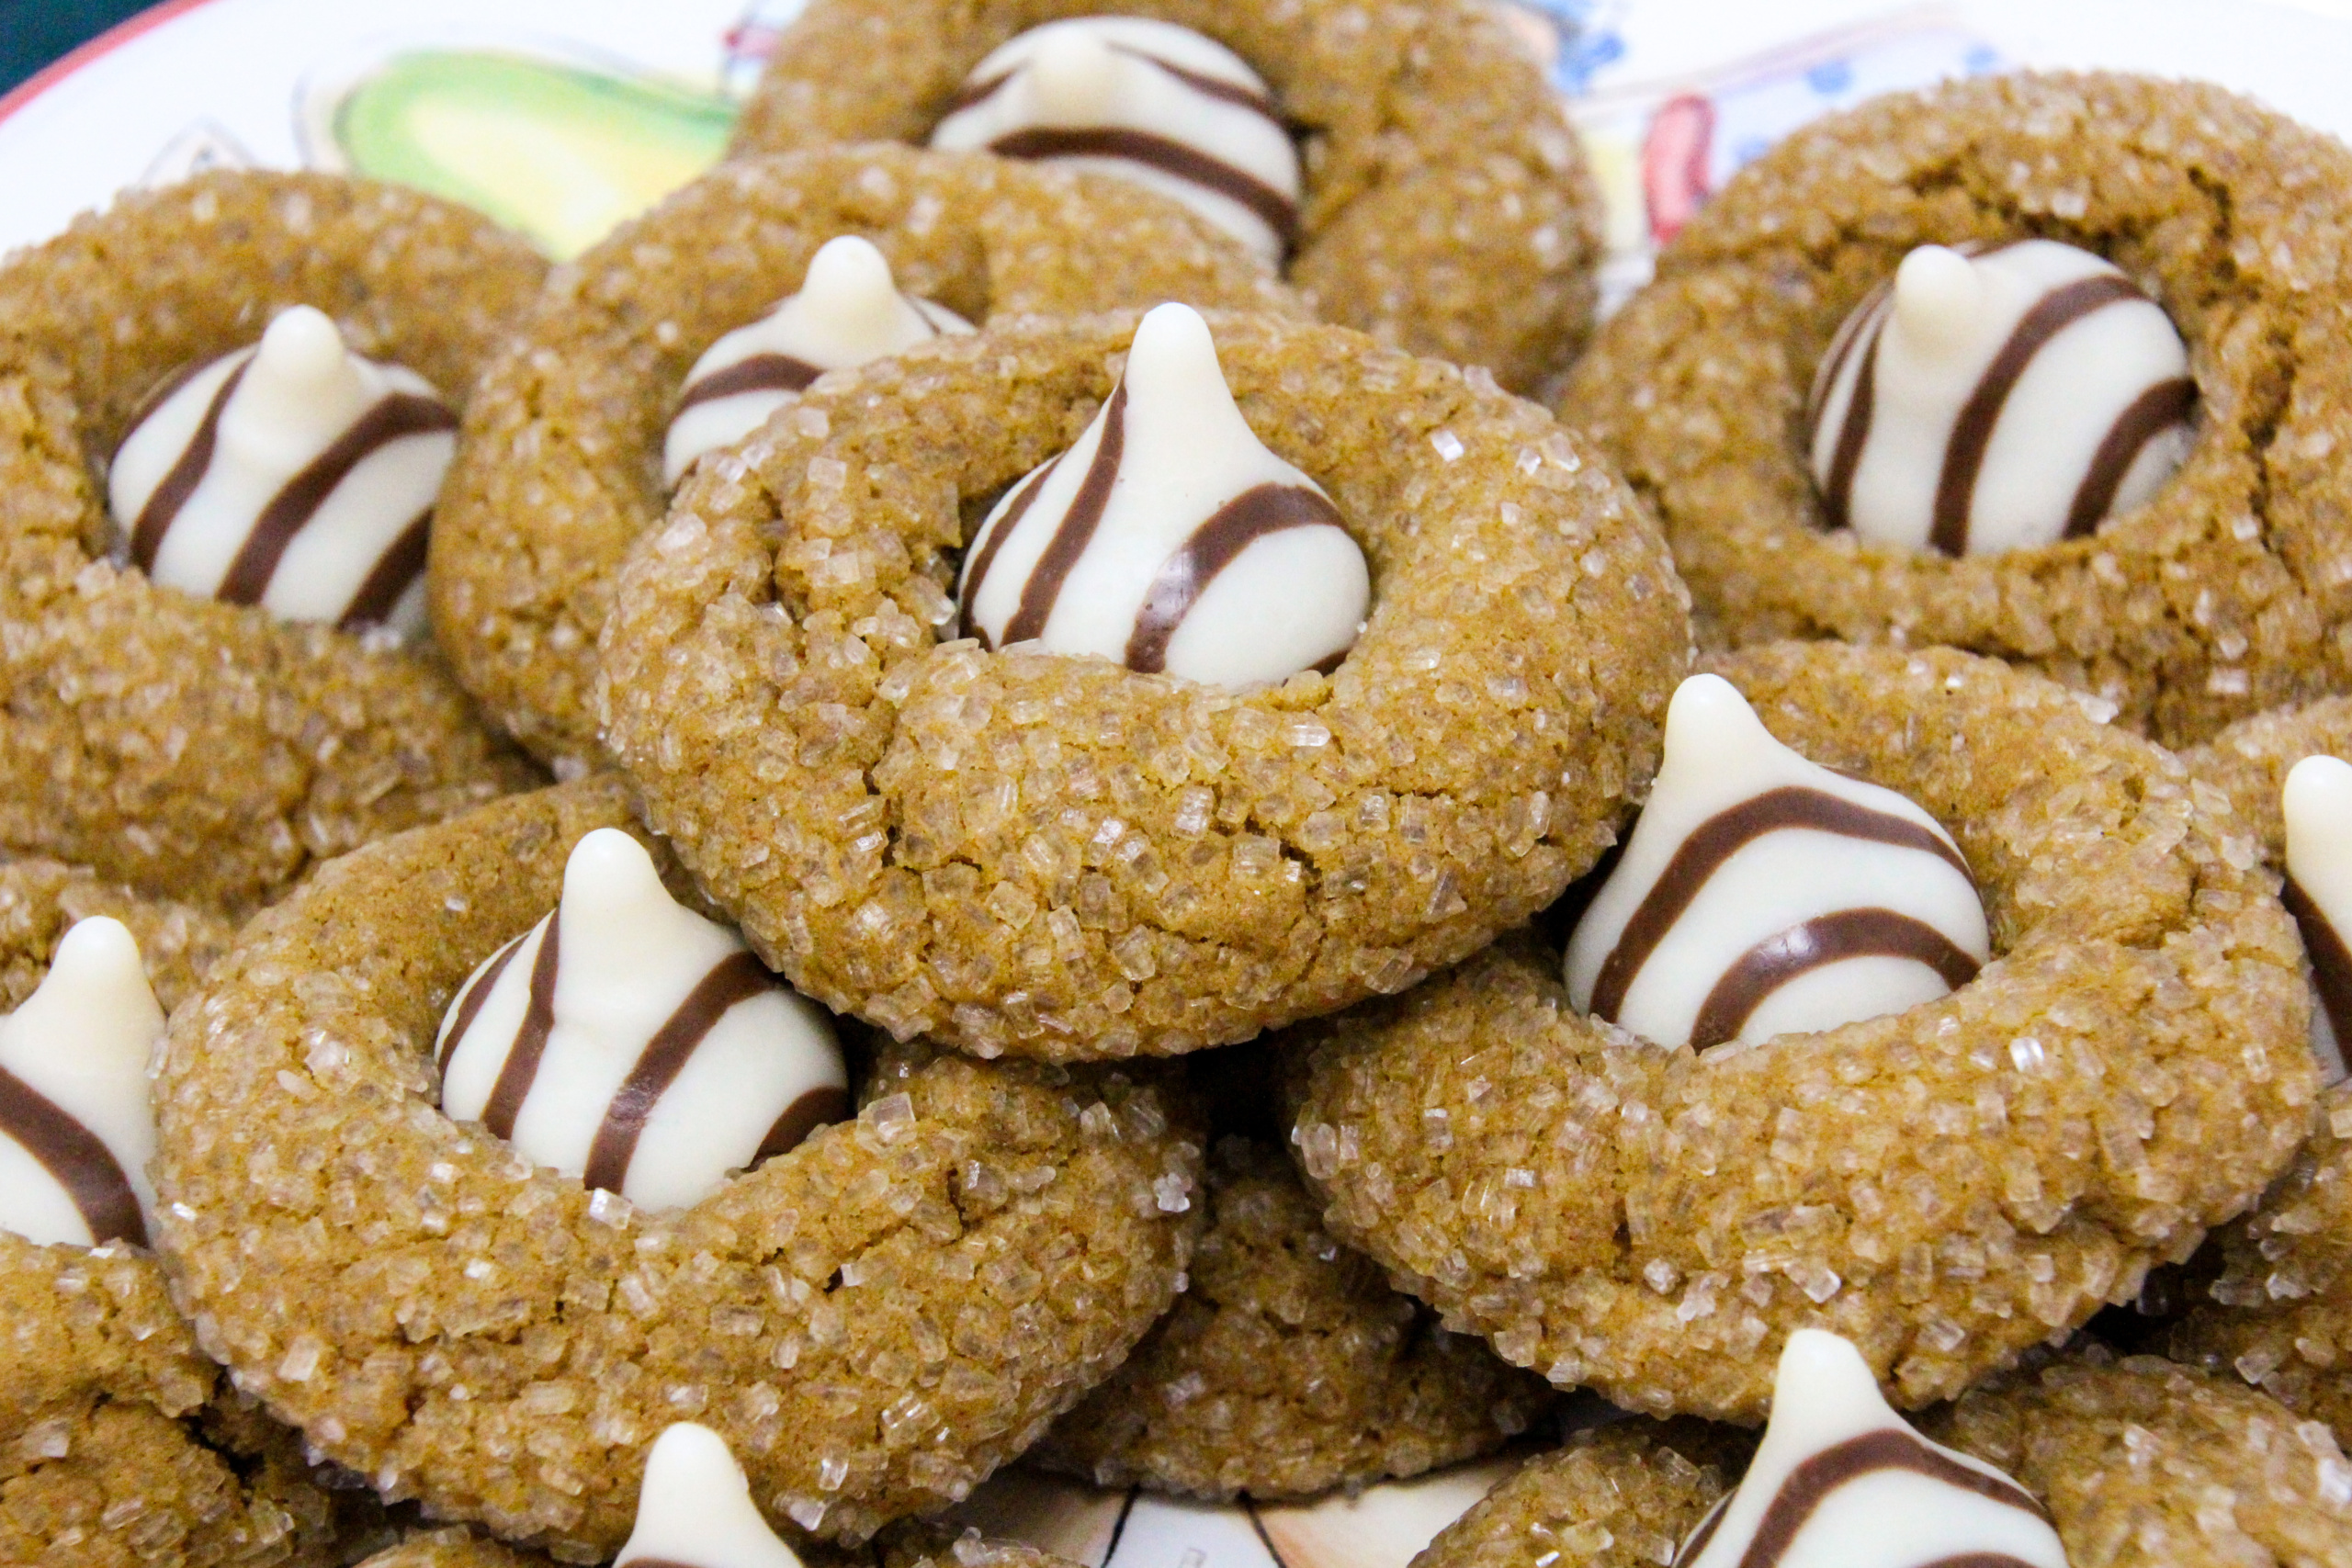 Gingerbread Kiss Cookies are spice-filled cookies topped with a white chocolate Hershey Kiss. Soft on the inside and a bit crunchy on the outside, Santa will be thrilled to find these on his cookie plate. Recipe created by Cinnamon & Sugar for EVERGREEN WISHES AT MOONGLOW by Deborah Garner. 